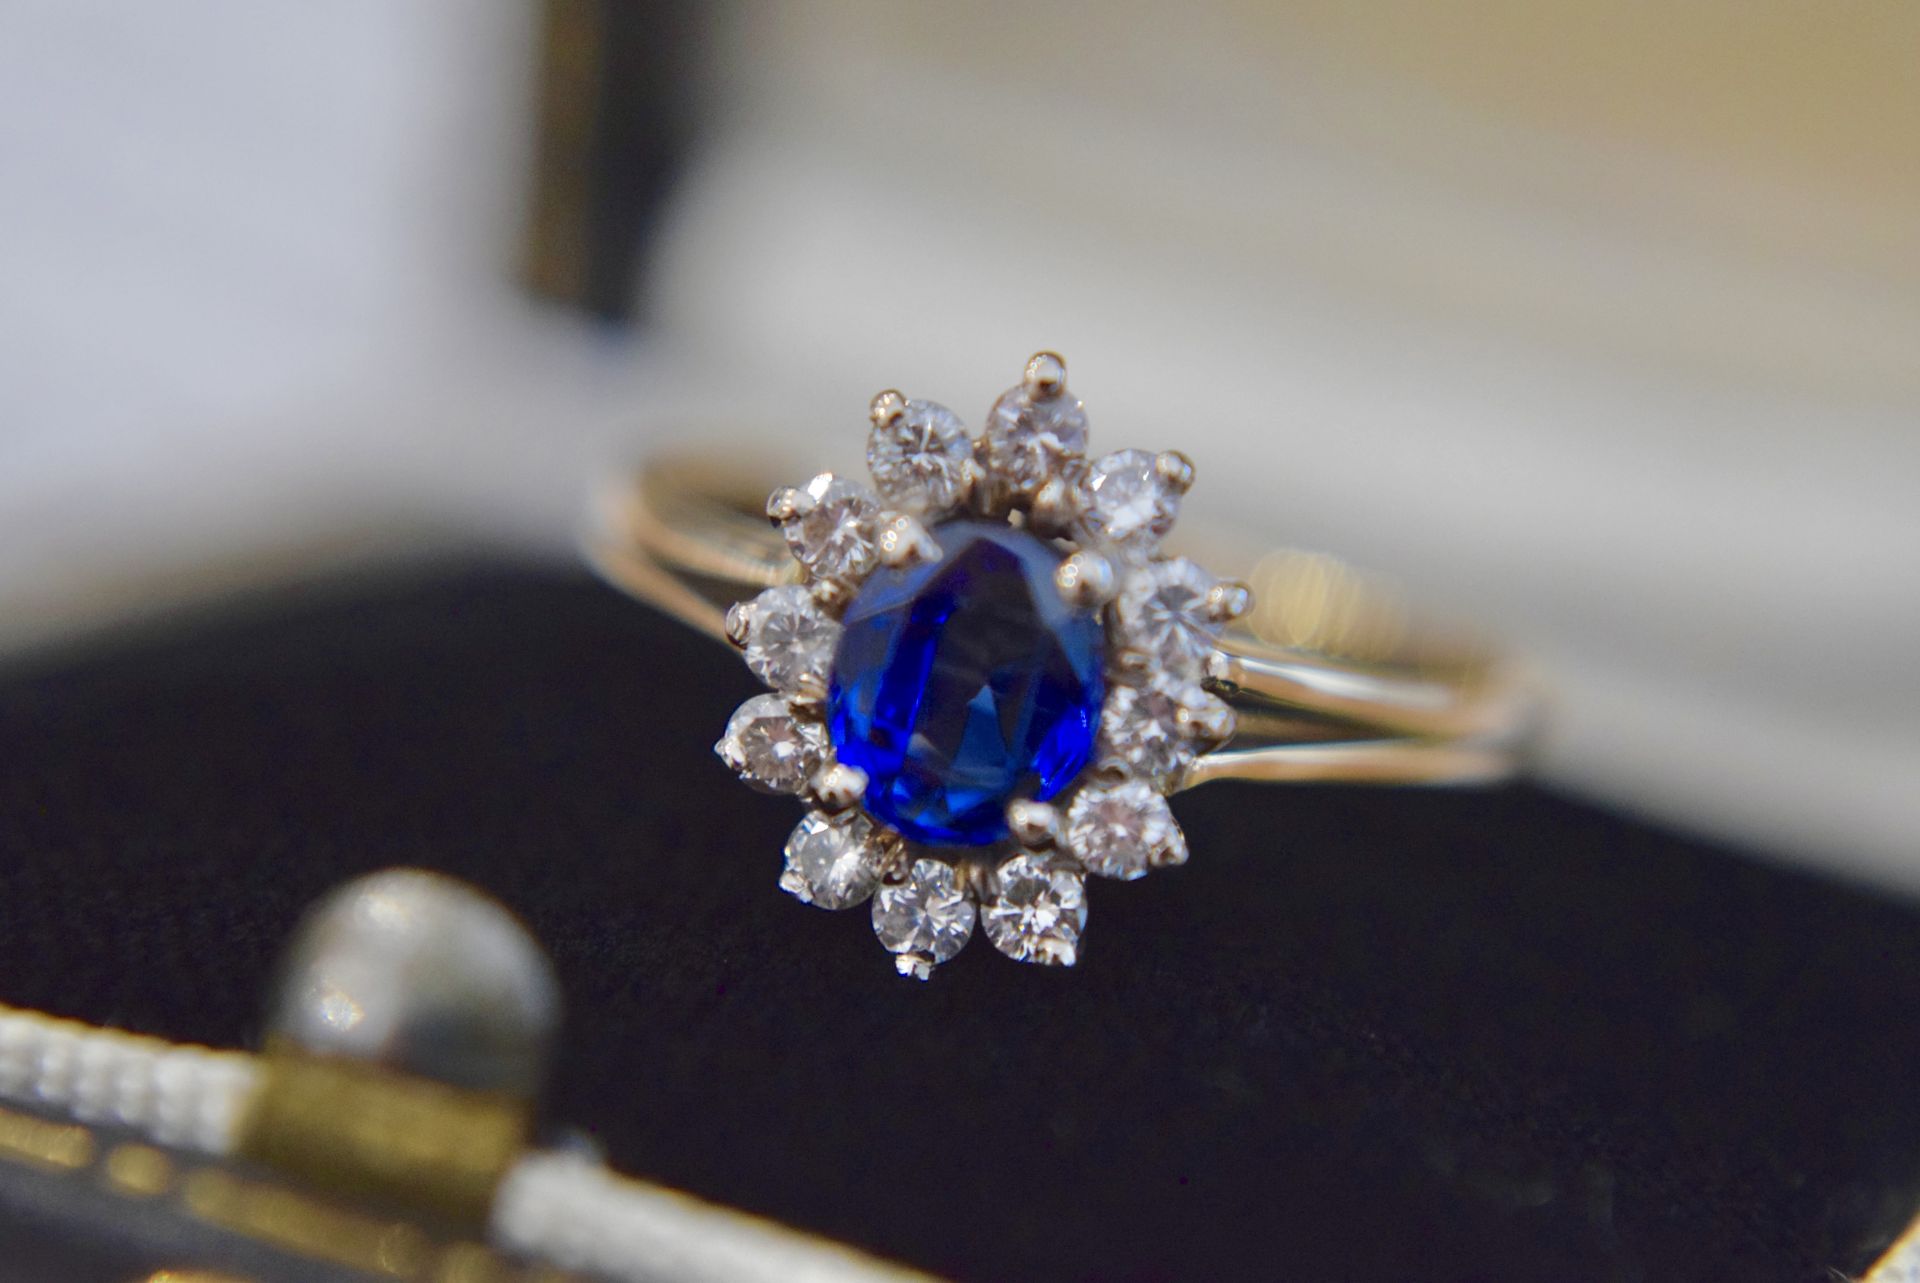 FINE QUALITY 1.25CT VELVET BLUE SAPPHIRE & DIAMOND HALO RING IN 14K YELLOW GOLD - Image 7 of 9